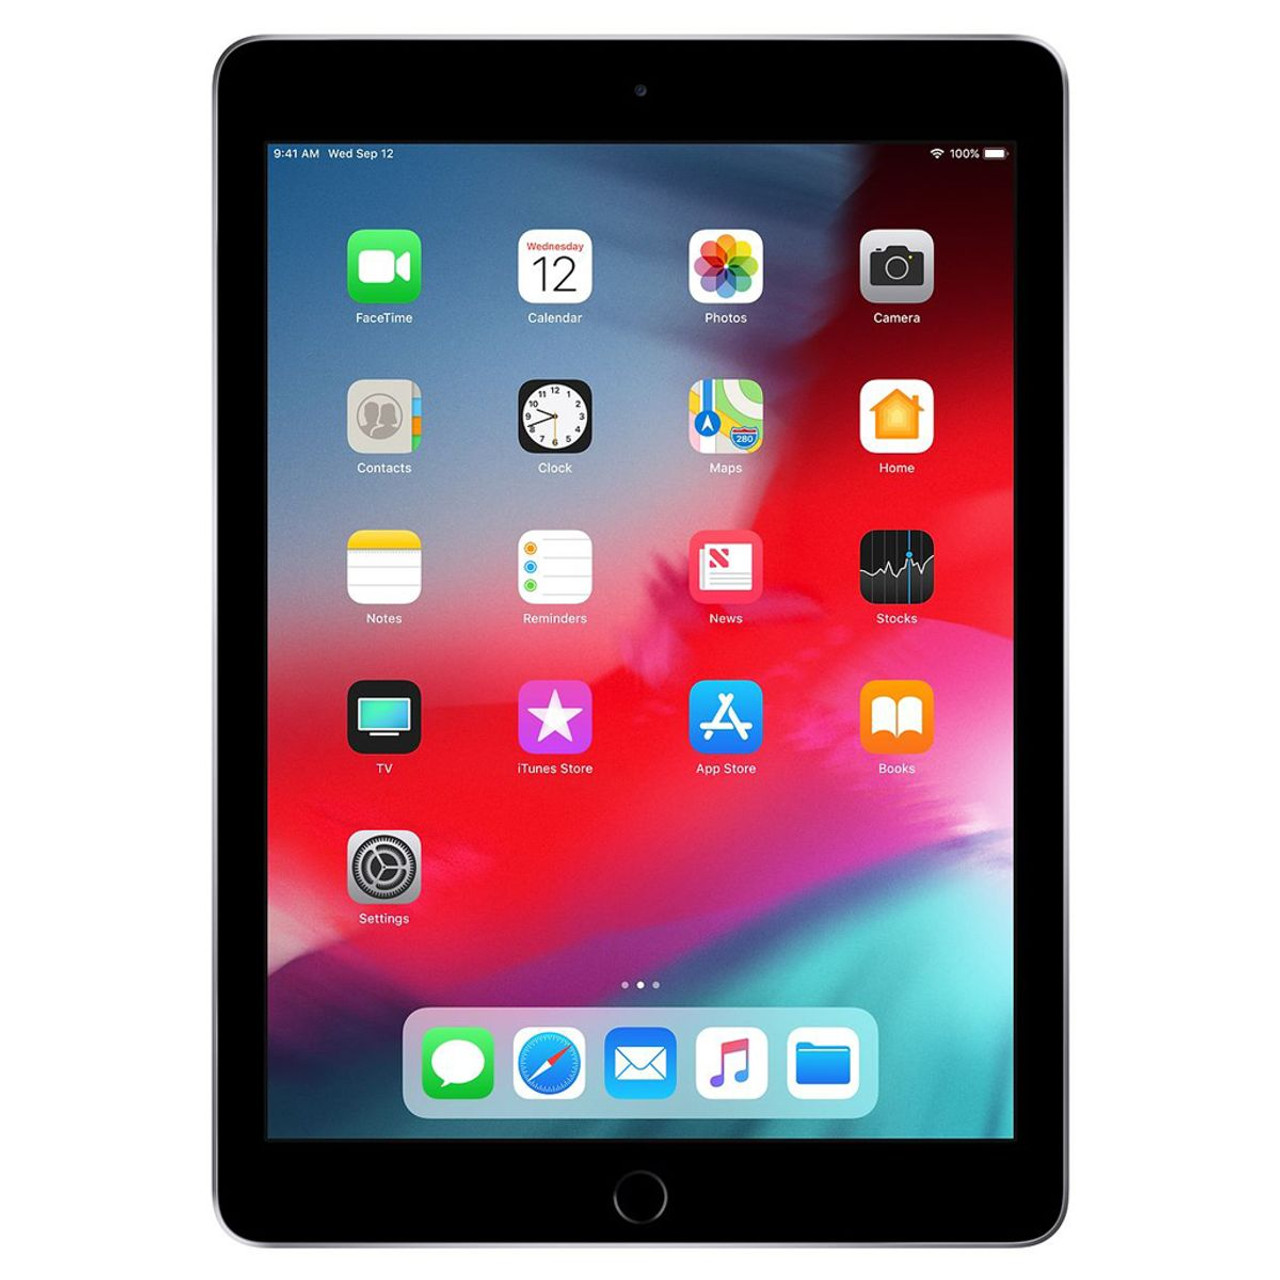 Apple® iPad 6th Gen with Wi-Fi + Cellular, Unlocked (32GB) product image